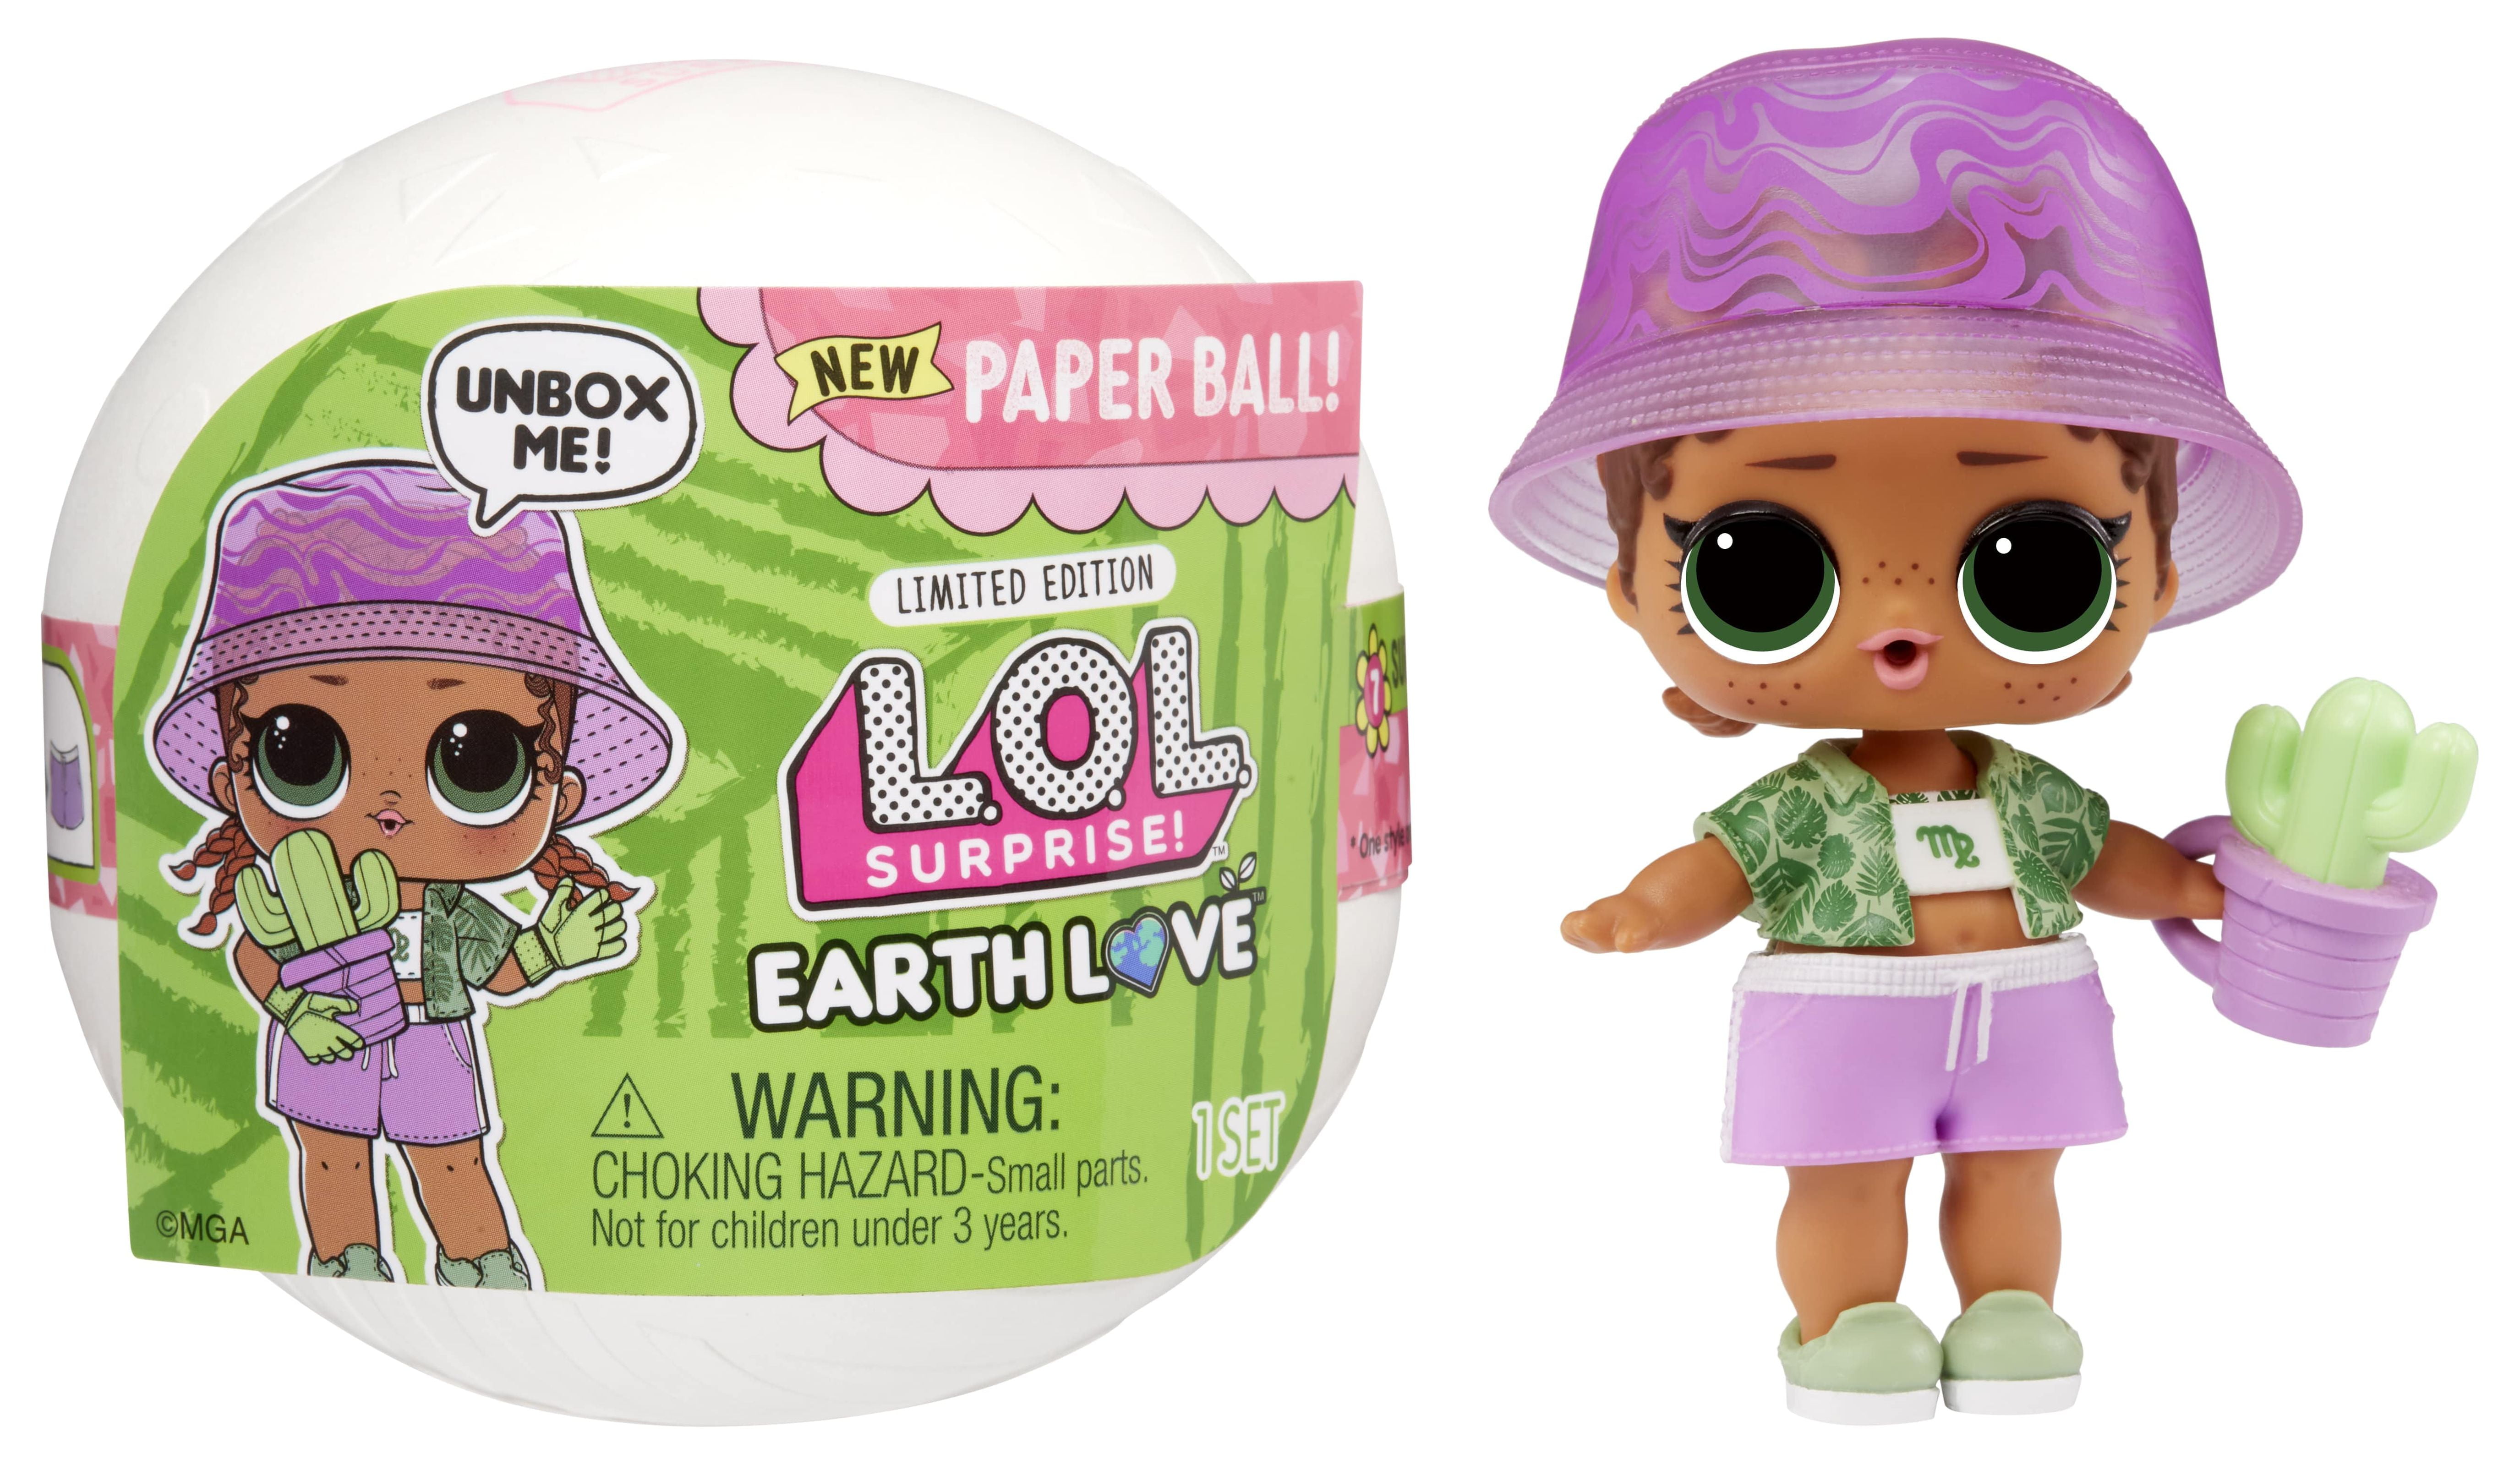 Lol Surprise Earth Love Earthy Bb Doll with 7 Surprises Earth Day Doll Accessories Limited Edition Doll Collectible Doll Paper Packaging